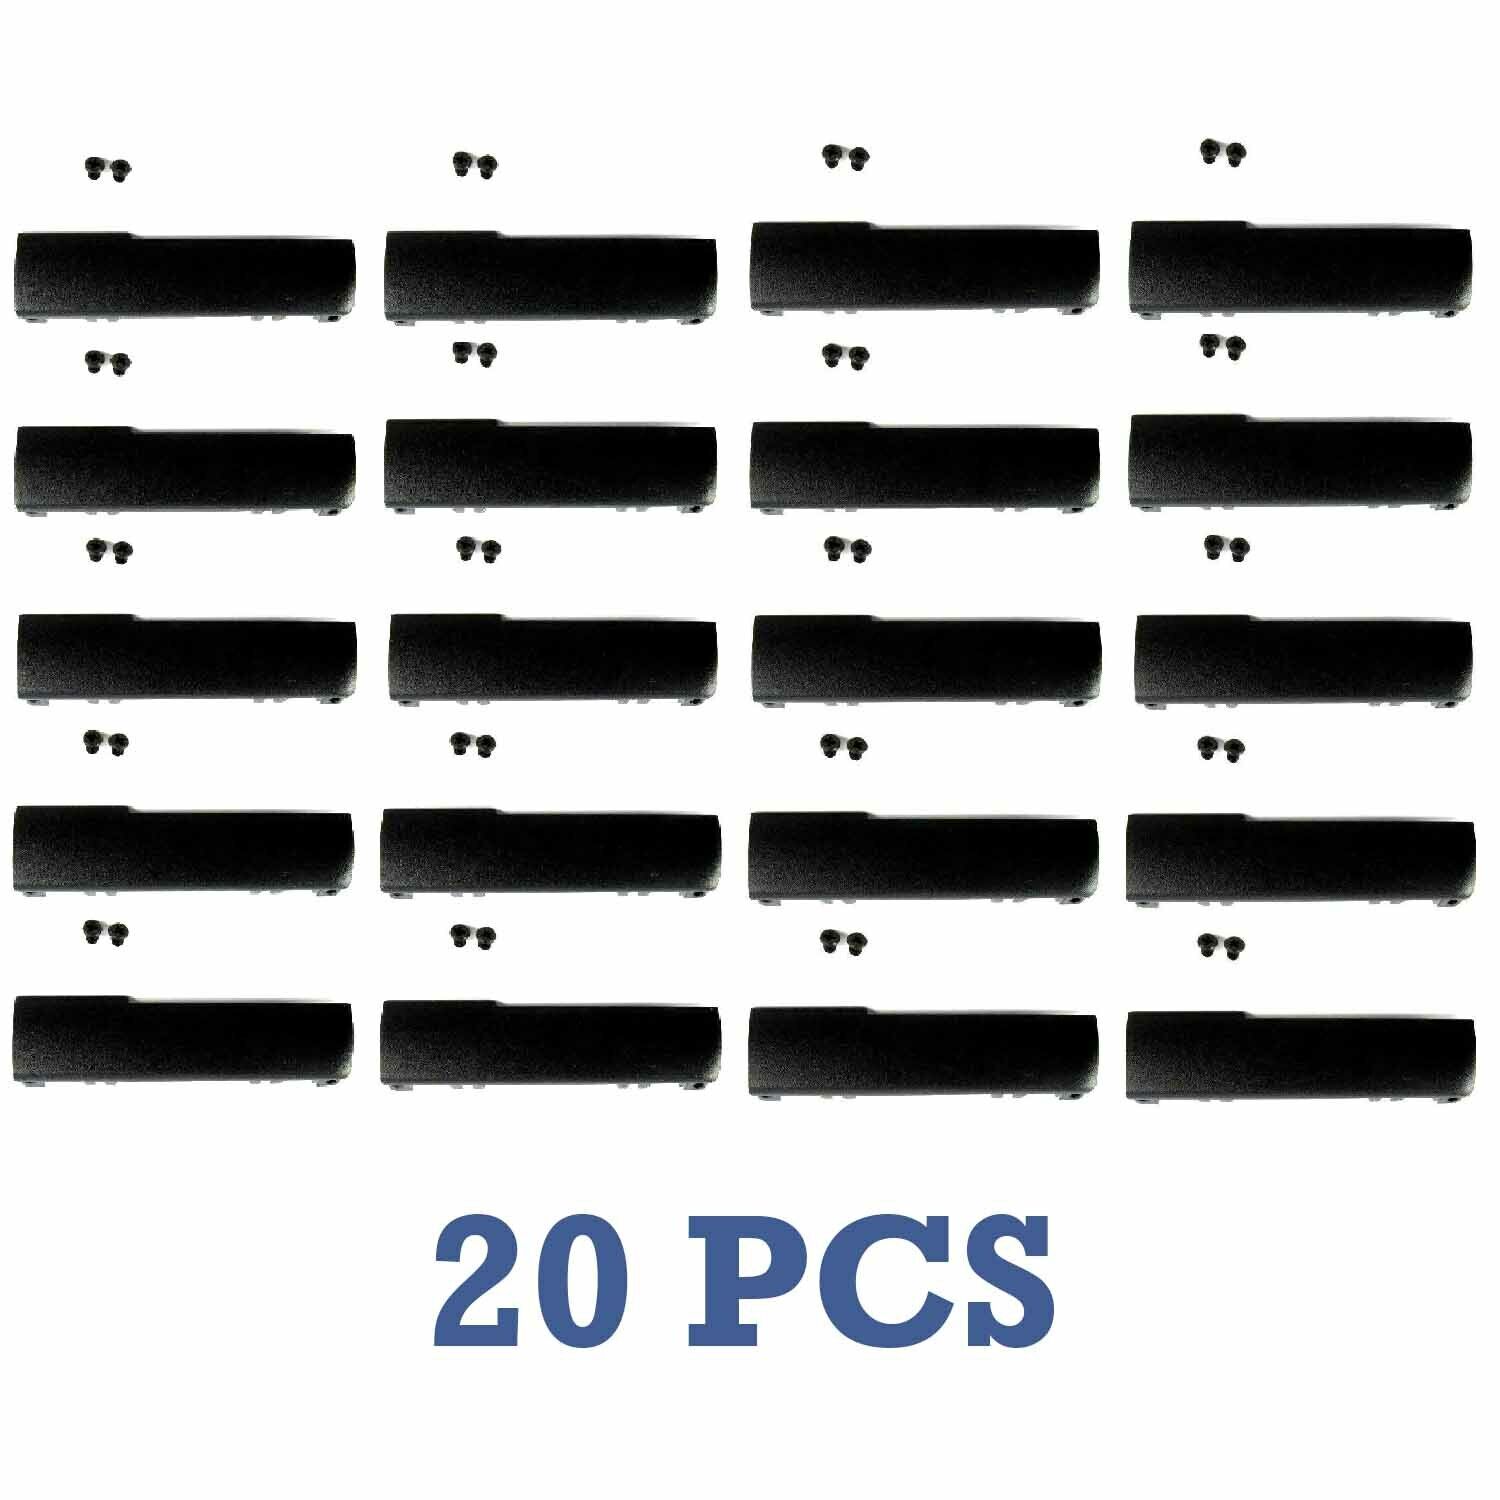 20 Pcs HDD Hard Drive Caddy Cover For Dell Latitude E6440 Laptop with Screws